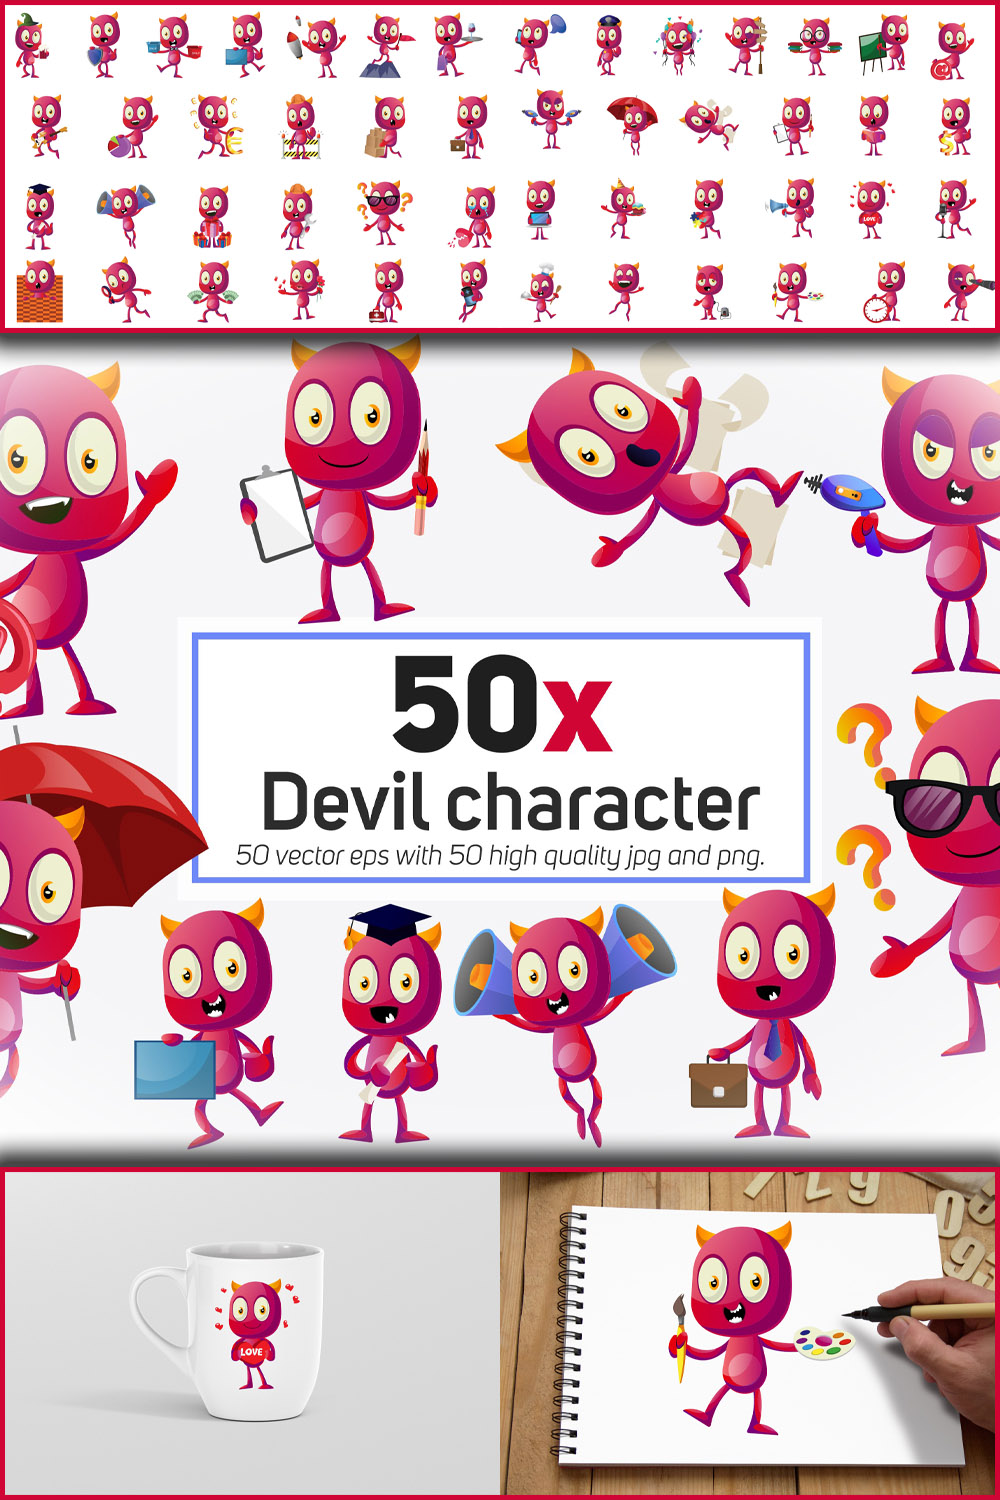 Devil character collection illustration of pinterest.